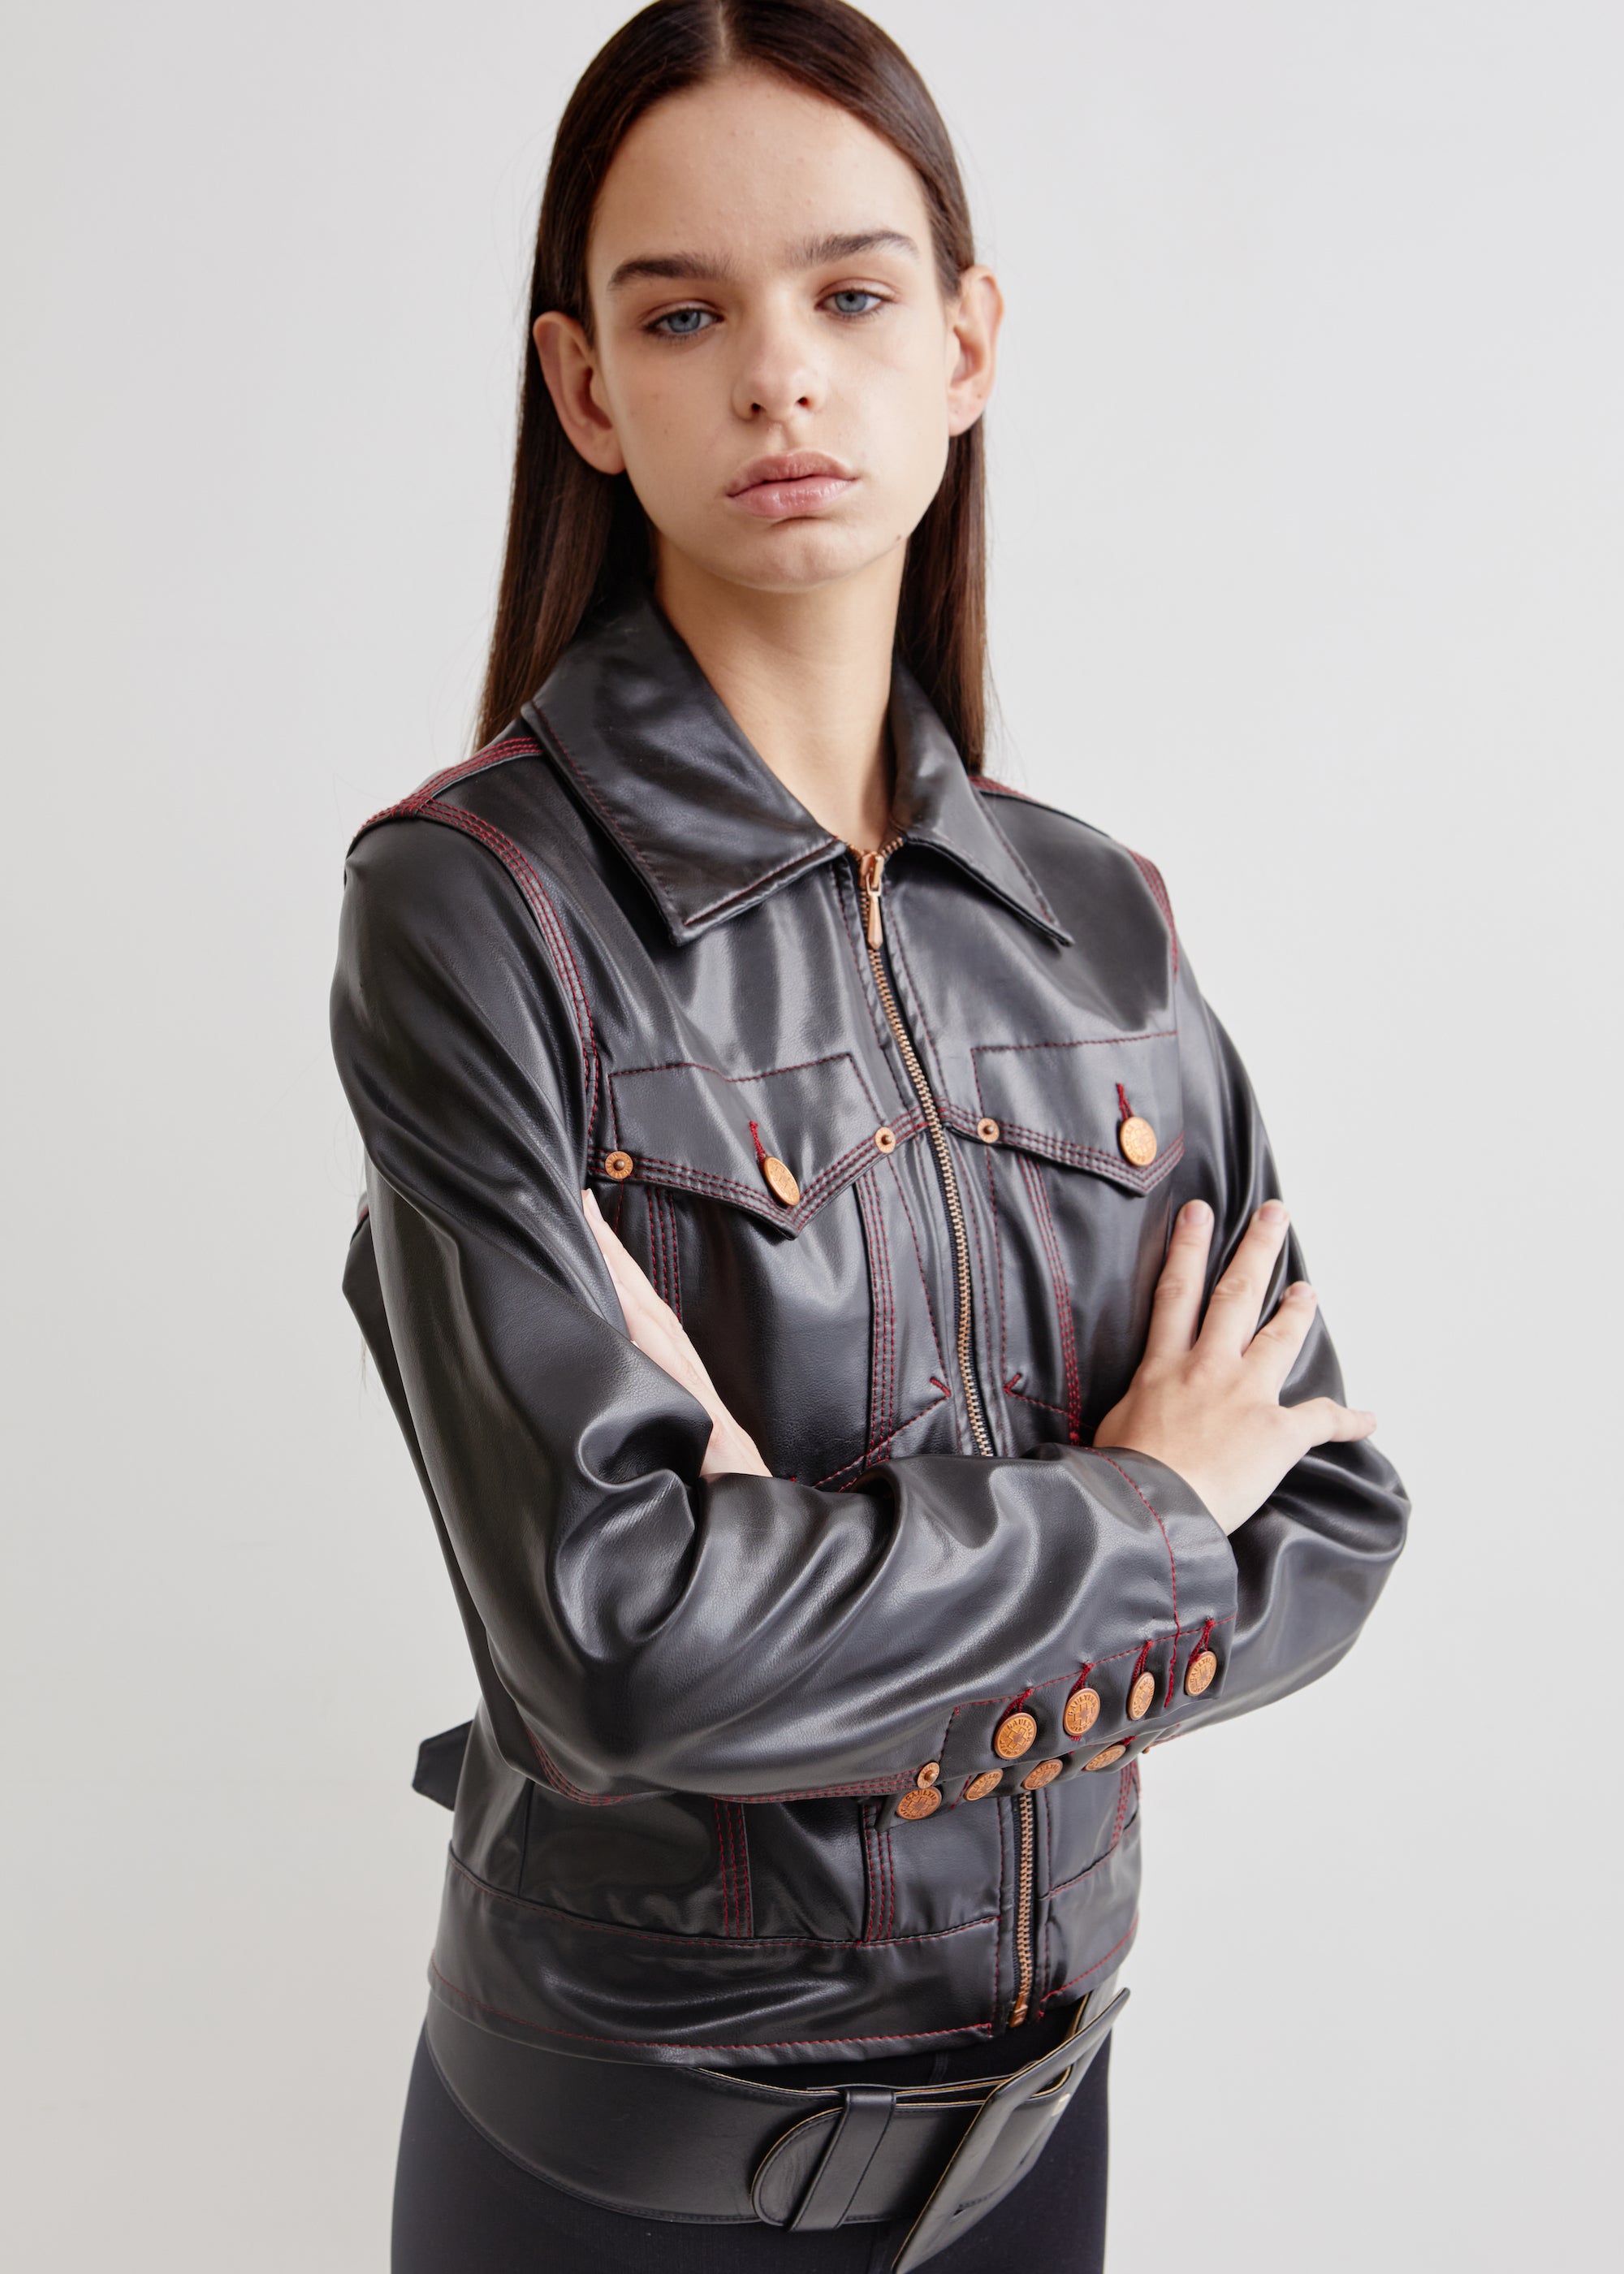 Jean Paul Gaultier <br> 90's PVC vegan leather overstitched jacket with brass logo buttons